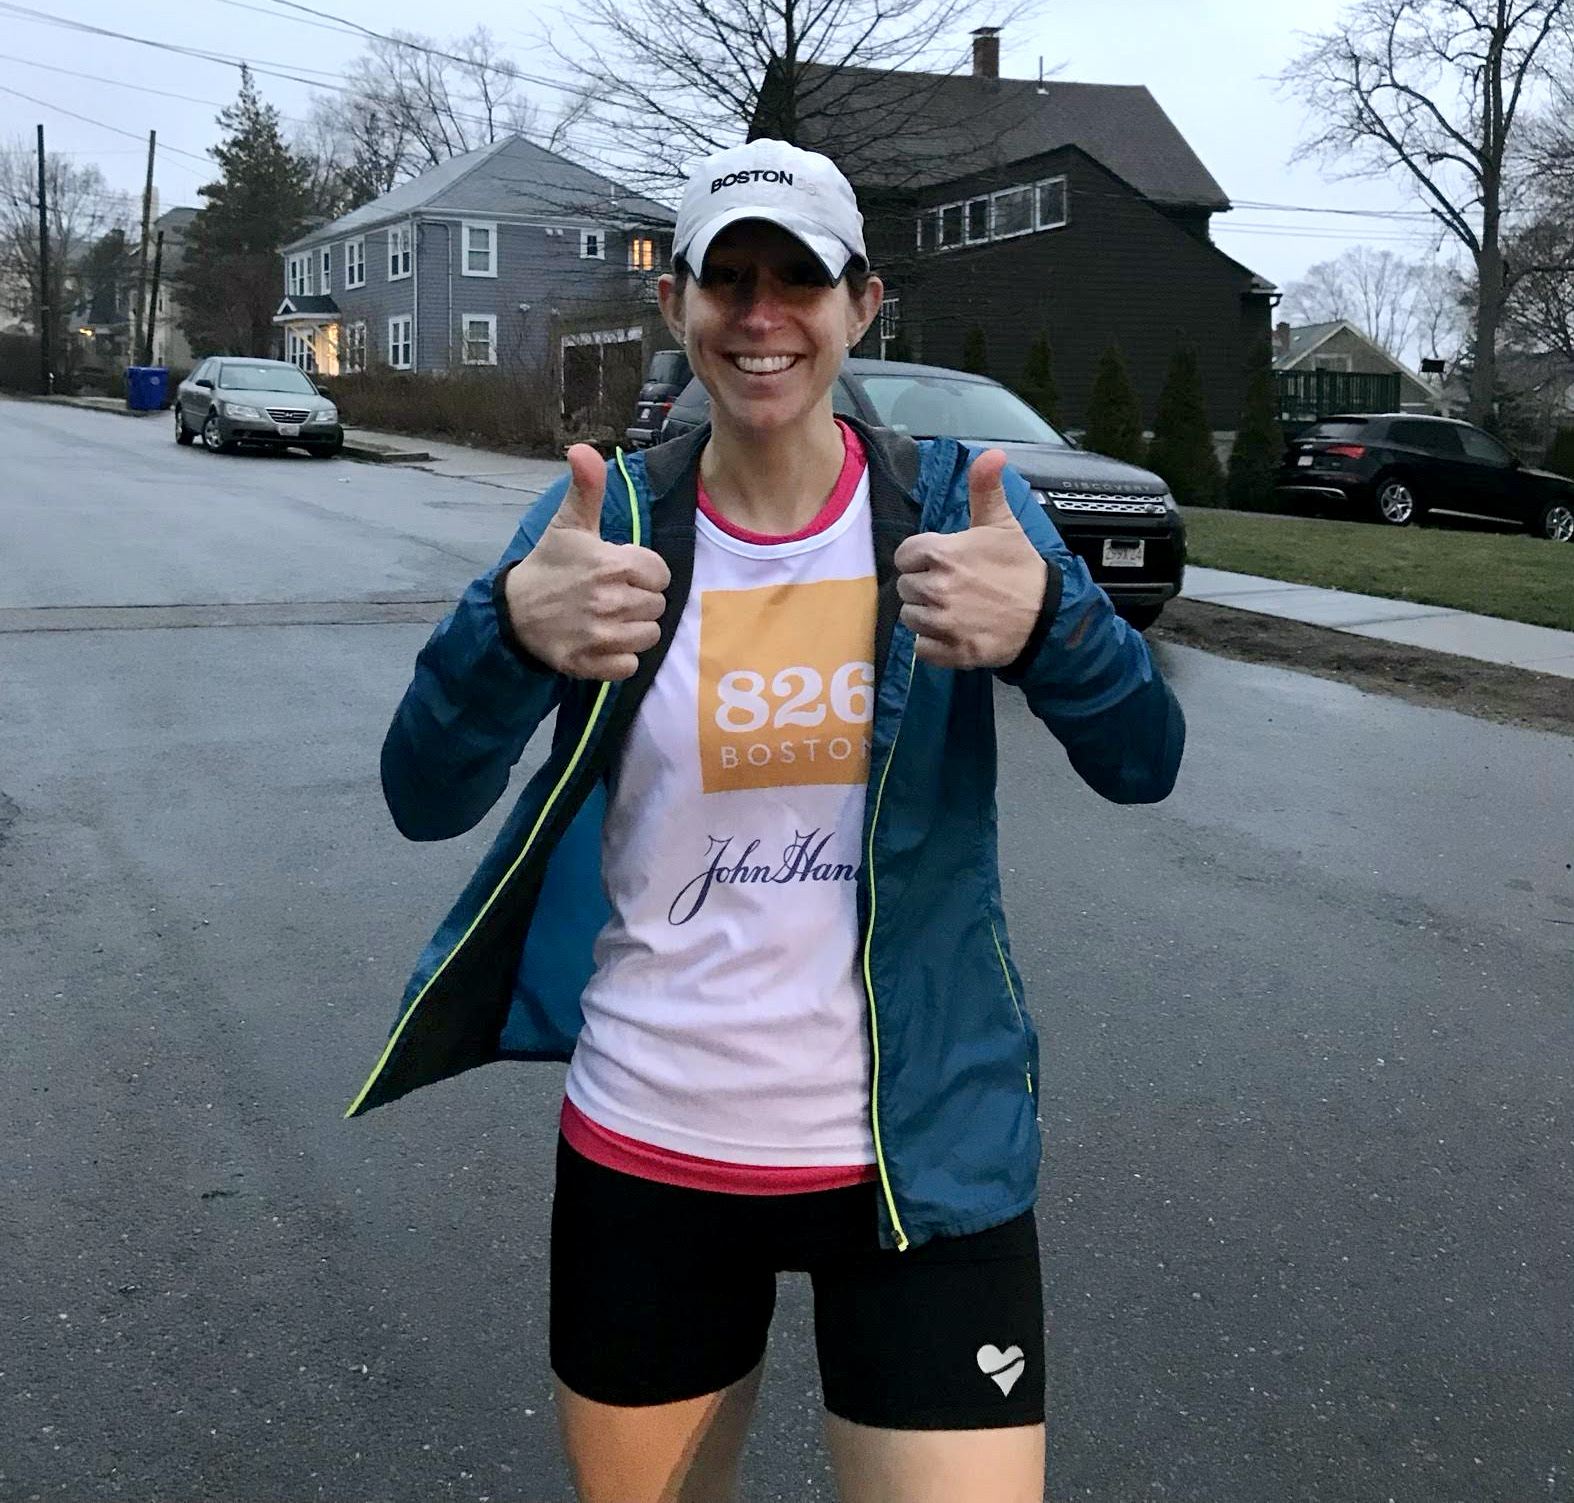 Erin Sunderland stands outside wearing a hat and a 826 boston white tshirt and running shorts. She is posing with two thumbs up